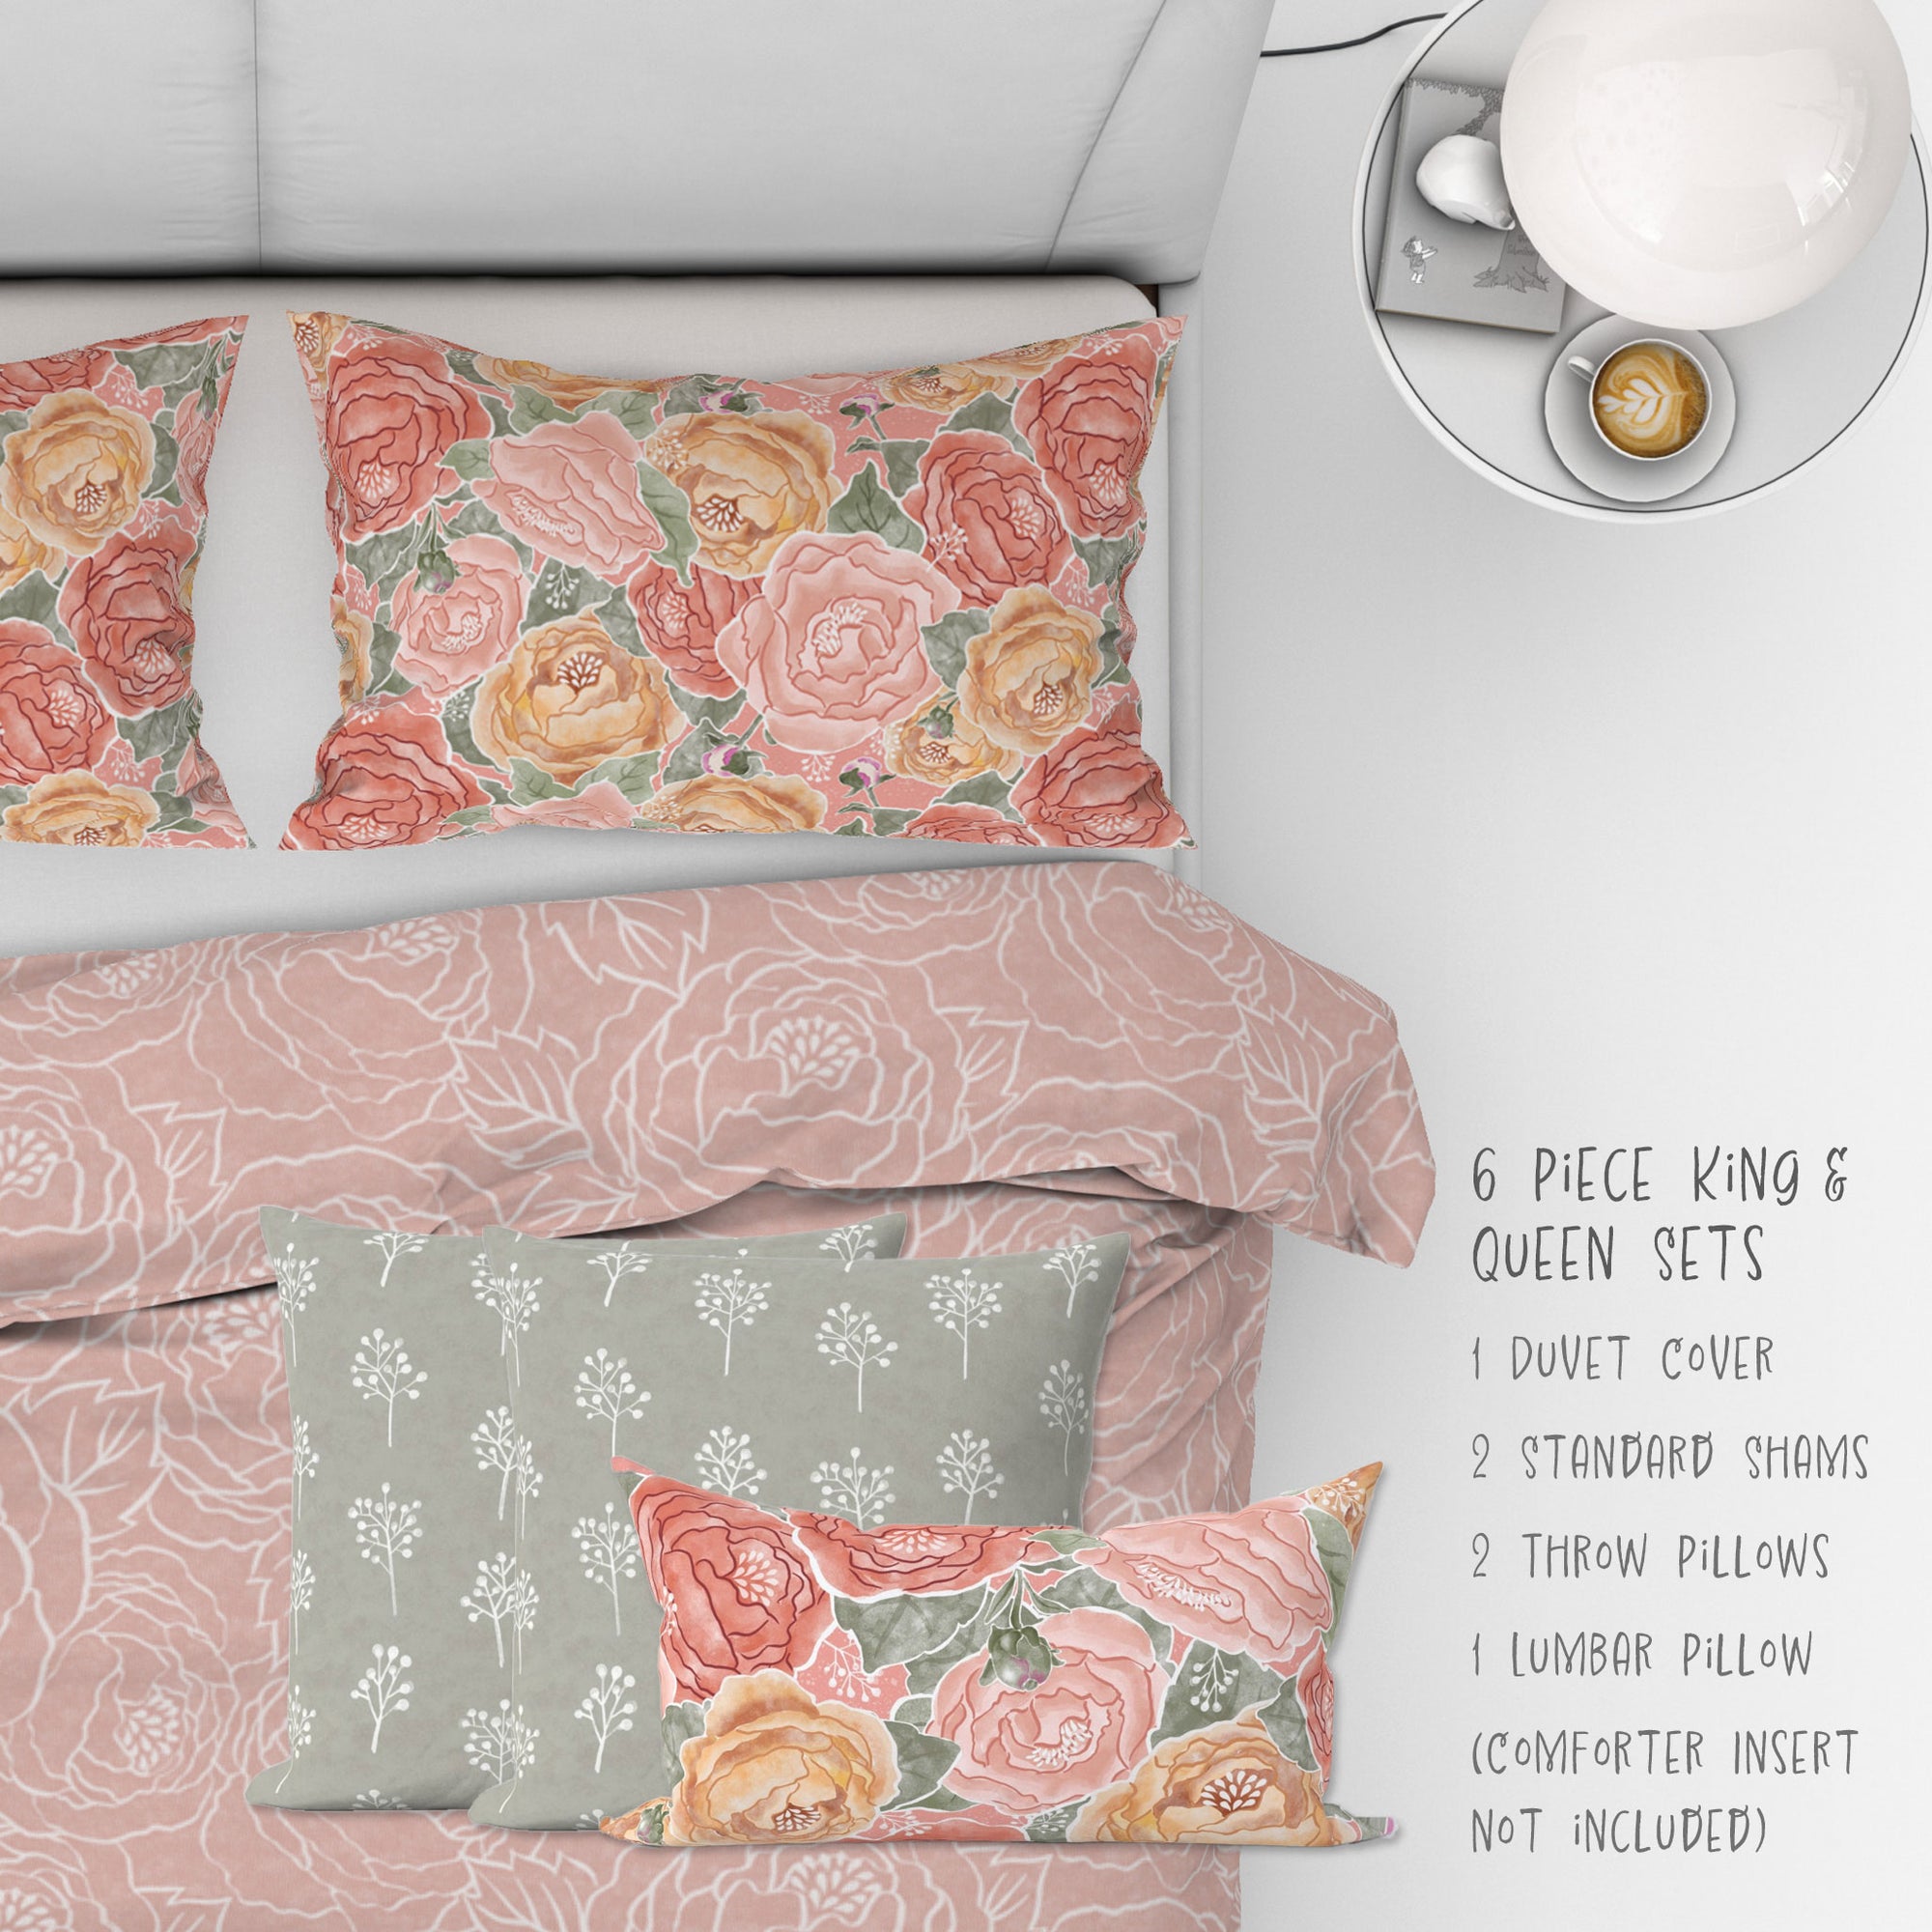 6 Piece Sets for Queen & King sizes - Pretty In Peony Line on Pink comes with Duvet cover, two Shams, 2 18” Throw Pillows and 1 Lumbar Pillow